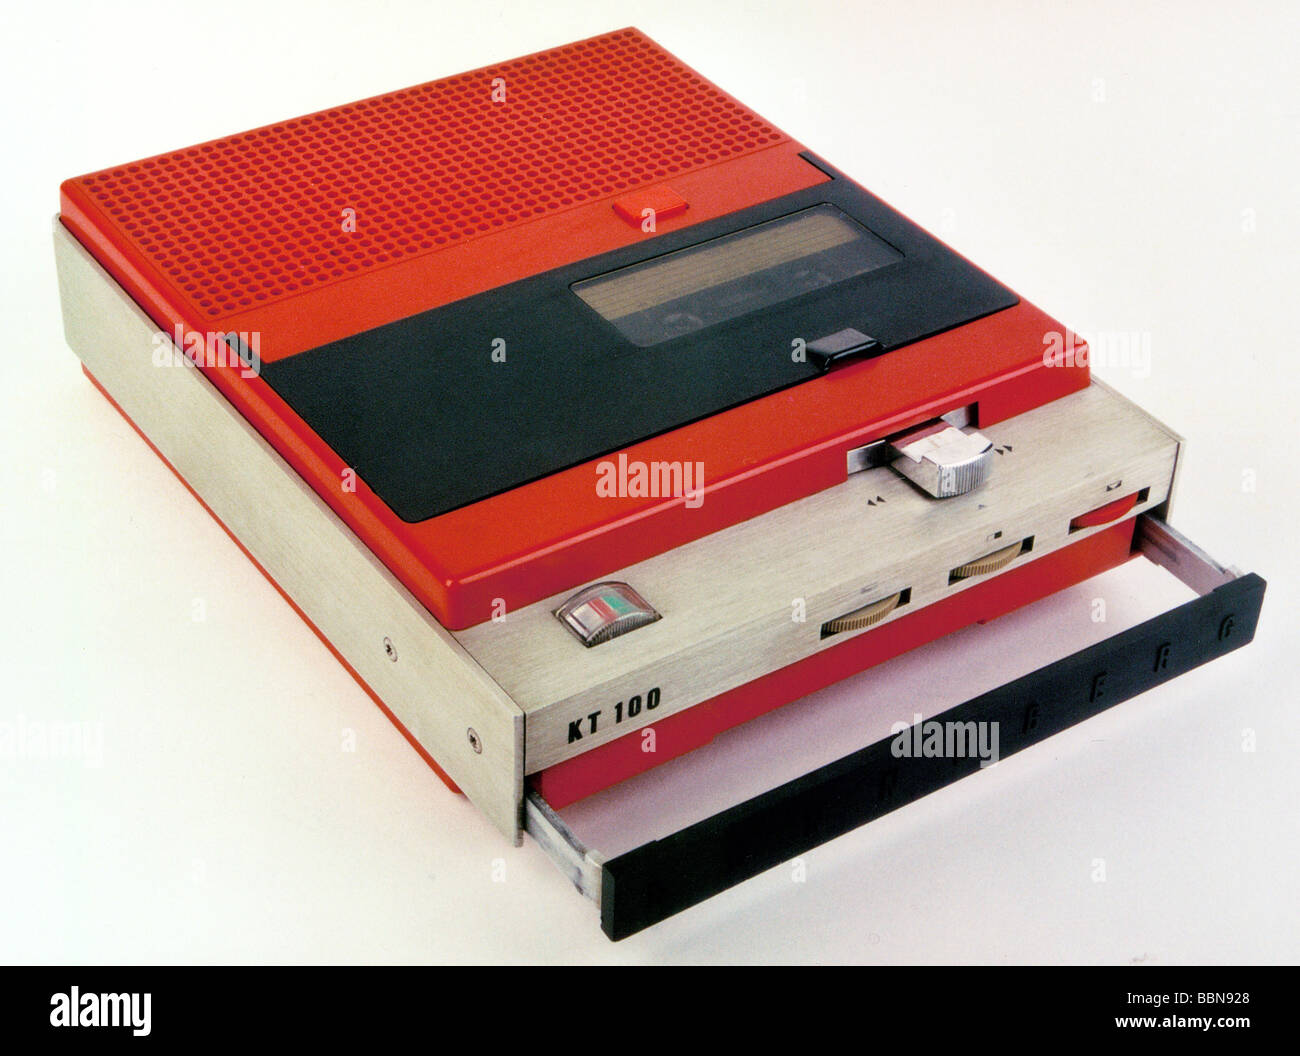 technics, tape recorder, combination recorder KT 100, made by VEB  Stern-Radio Sonneberg, GDR, 1969/1970, historic, historical, 20th century,  East-Germany, East Germany, DDR, radio set, technic, factory design, first portable  cassette recorder in